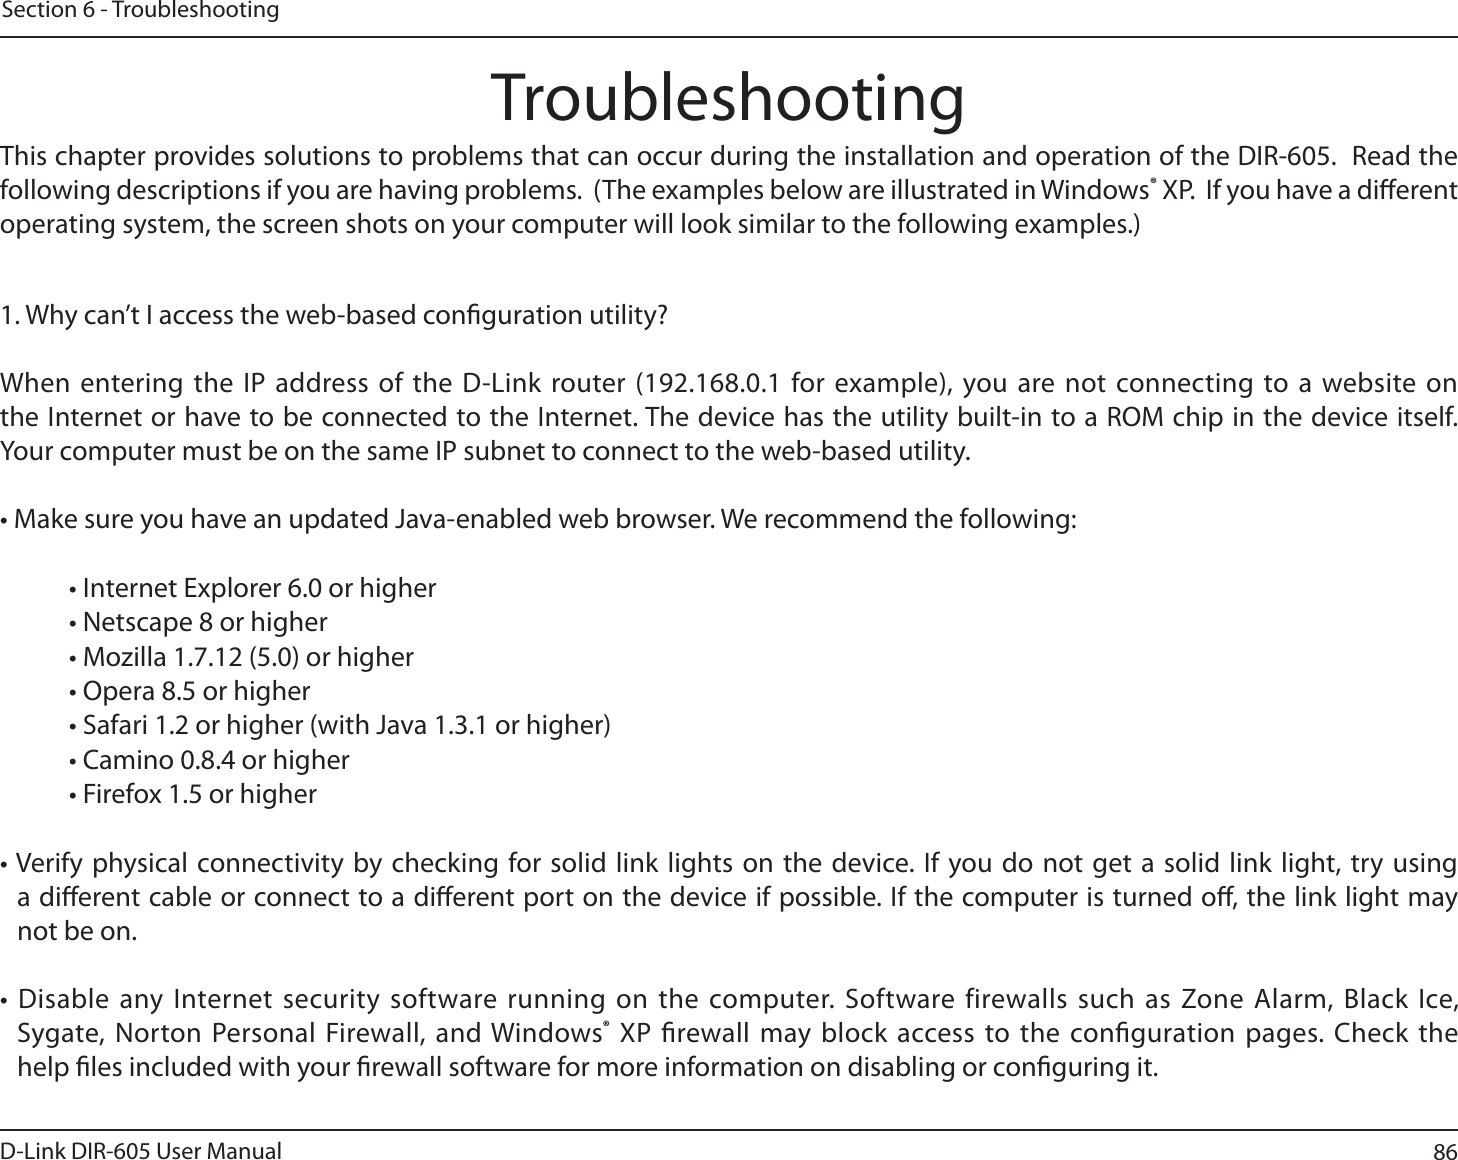 86D-Link DIR-605 User ManualSection 6 - TroubleshootingTroubleshootingThis chapter provides solutions to problems that can occur during the installation and operation of the DIR-605.  Read the following descriptions if you are having problems.  (The examples below are illustrated in Windows® XP.  If you have a dierent operating system, the screen shots on your computer will look similar to the following examples.)1. Why can’t I access the web-based conguration utility?When entering the IP address of the D-Link router (192.168.0.1 for example), you are not connecting to a website on the Internet or have to be connected to the Internet. The device has the utility built-in to a ROM chip in the device itself. :PVSDPNQVUFSNVTUCFPOUIFTBNF*1TVCOFUUPDPOOFDUUPUIFXFCCBTFEVUJMJUZt.BLFTVSFZPVIBWFBOVQEBUFE+BWBFOBCMFEXFCCSPXTFS8FSFDPNNFOEUIFGPMMPXJOHt*OUFSOFU&amp;YQMPSFSPSIJHIFSt/FUTDBQFPSIJHIFSt.P[JMMBPSIJHIFSt0QFSBPSIJHIFSt4BGBSJPSIJHIFSXJUI+BWBPSIJHIFSt$BNJOPPSIJHIFSt&apos;JSFGPYPSIJHIFSt7FSJGZ QIZTJDBMDPOOFDUJWJUZCZDIFDLJOHGPSTPMJEMJOLMJHIUT POUIFEFWJDF*G ZPVEPOPUHFU BTPMJEMJOL MJHIUUSZVTJOHa dierent cable or connect to a dierent port on the device if possible. If the computer is turned o, the link light may not be on.t%JTBCMFBOZ*OUFSOFUTFDVSJUZTPGUXBSFSVOOJOHPO UIFDPNQVUFS4PGUXBSFGJSFXBMMTTVDIBT;POF&quot;MBSN#MBDL*DFSygate, Norton Personal Firewall, and Windows® XP rewall may block access to the conguration pages. Check the help les included with your rewall software for more information on disabling or conguring it.